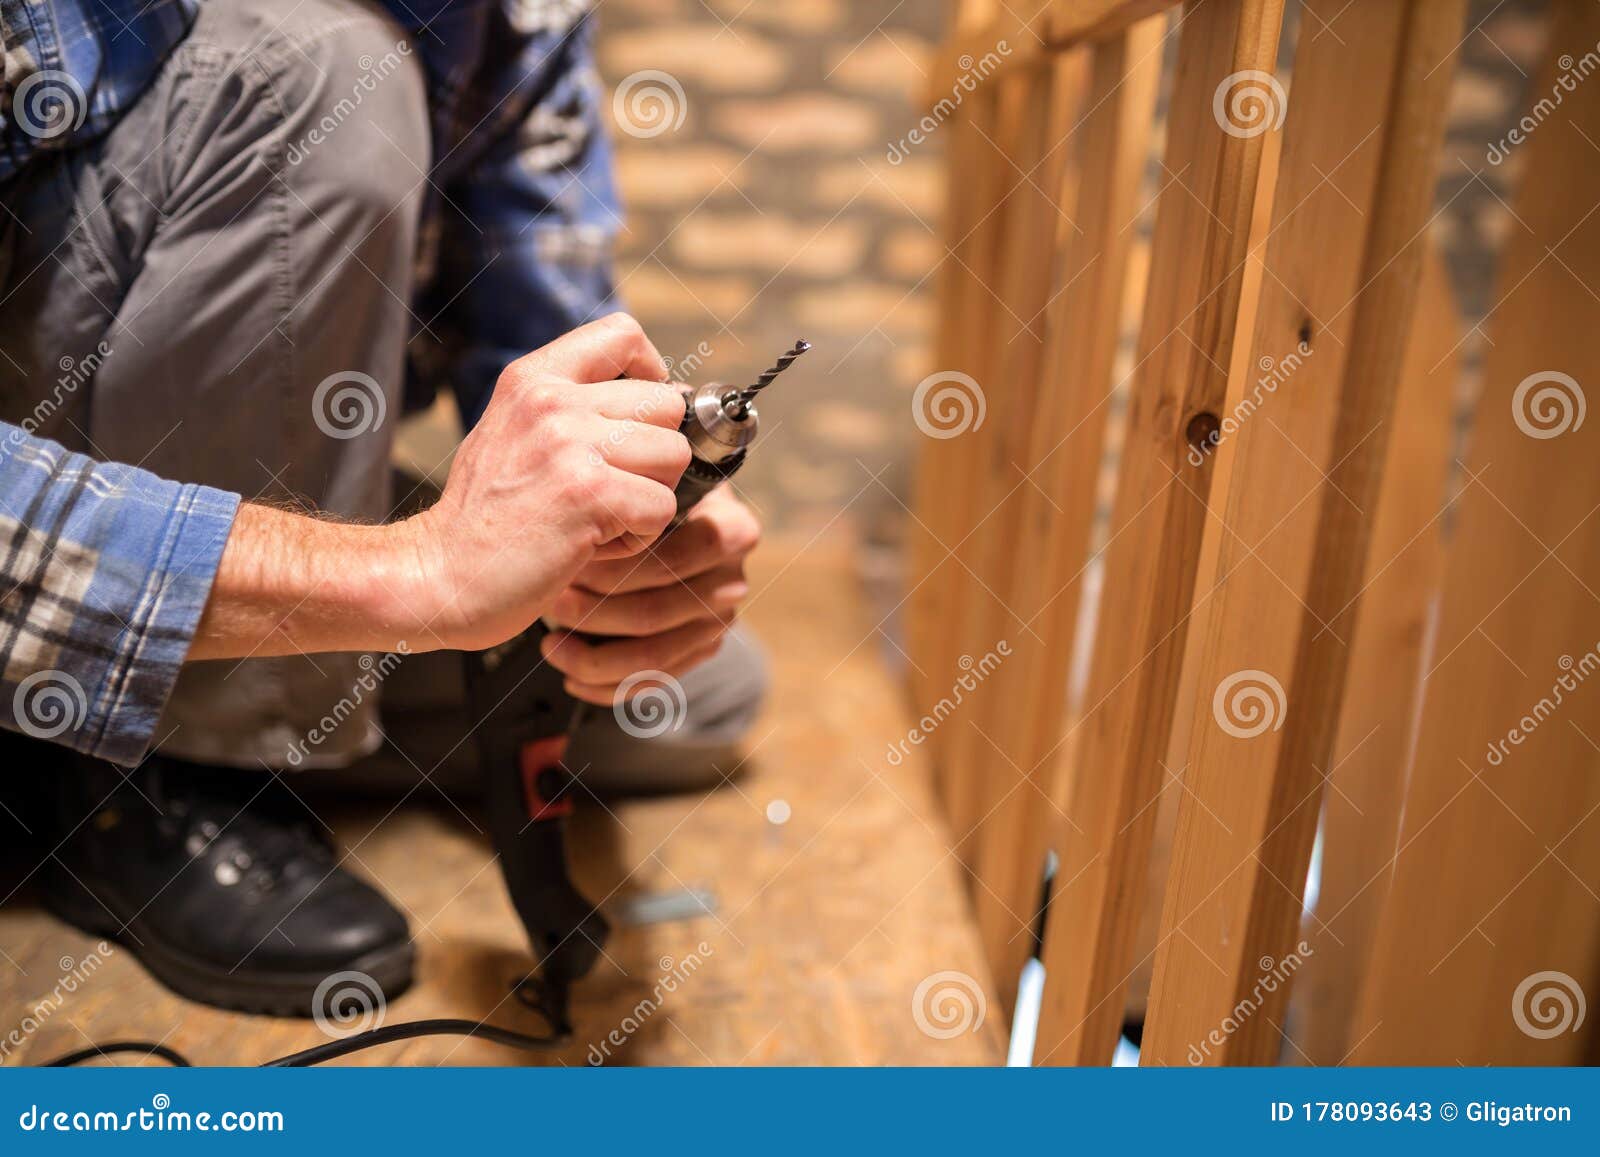 close-up of a young man replacing drill bits and tightening drill head